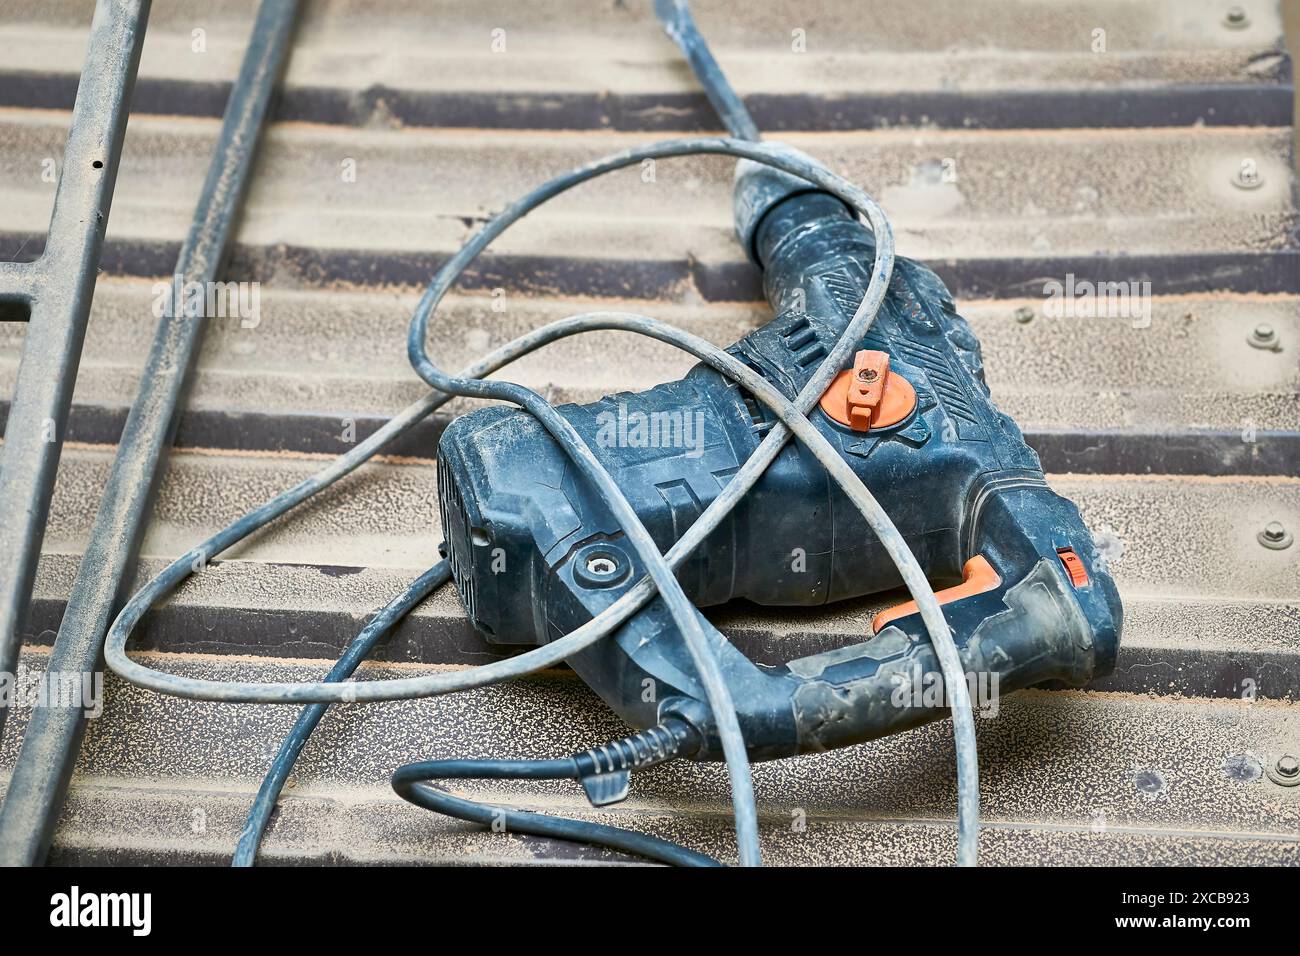 Electric rotary hammer drill on metal surface.Construction Stock Photo